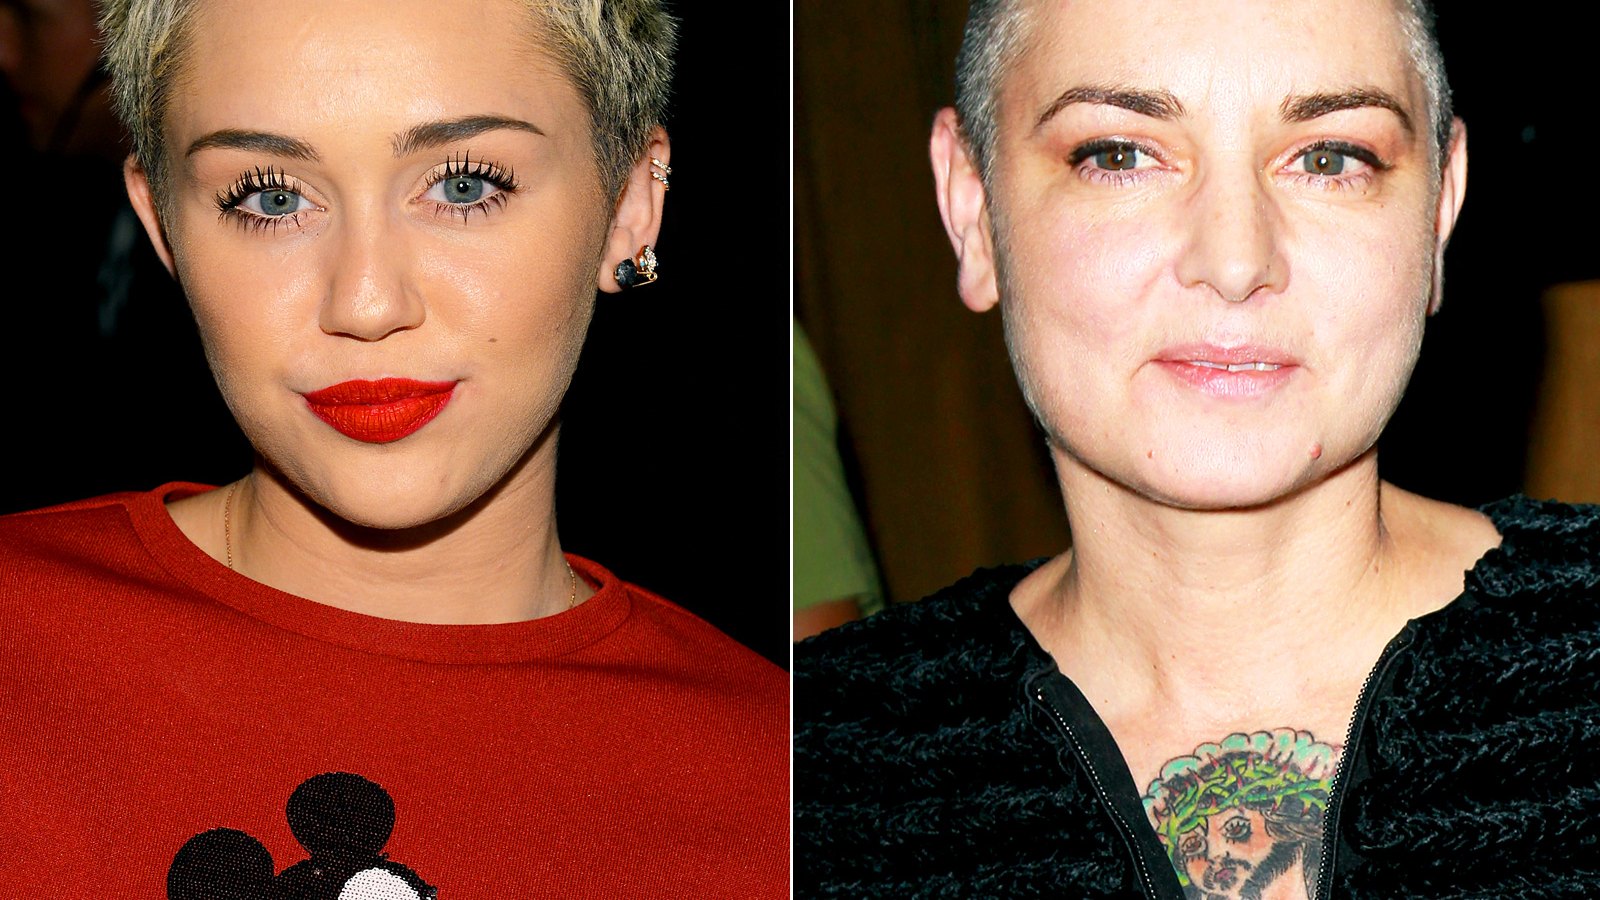 Miley Cyrus and Sinead O'Connor